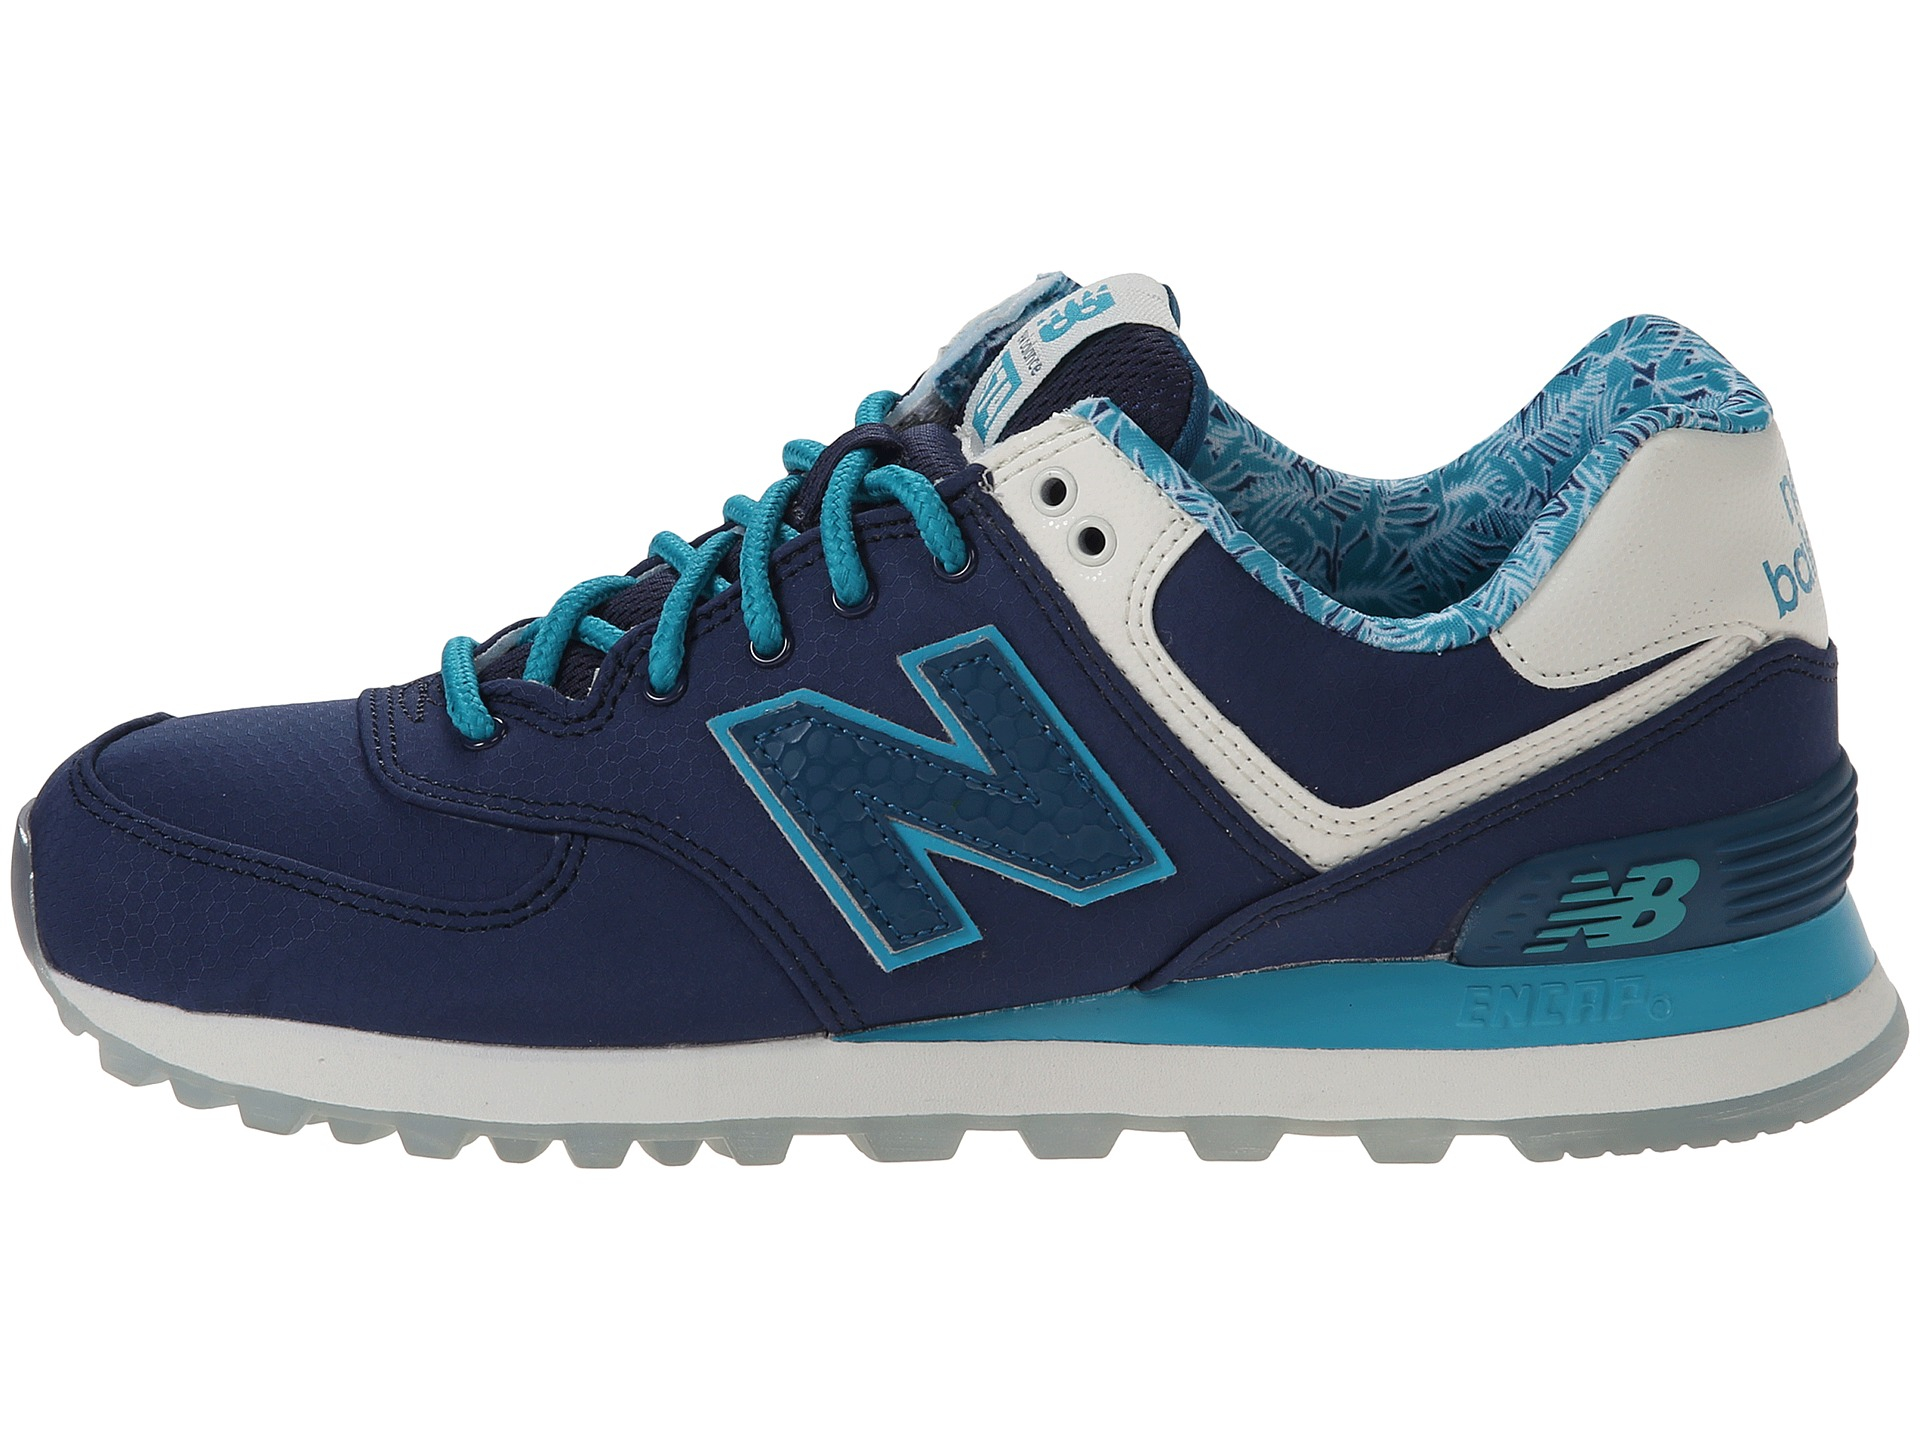 Lyst - New Balance Ml574 - Luau Collection in Blue for Men